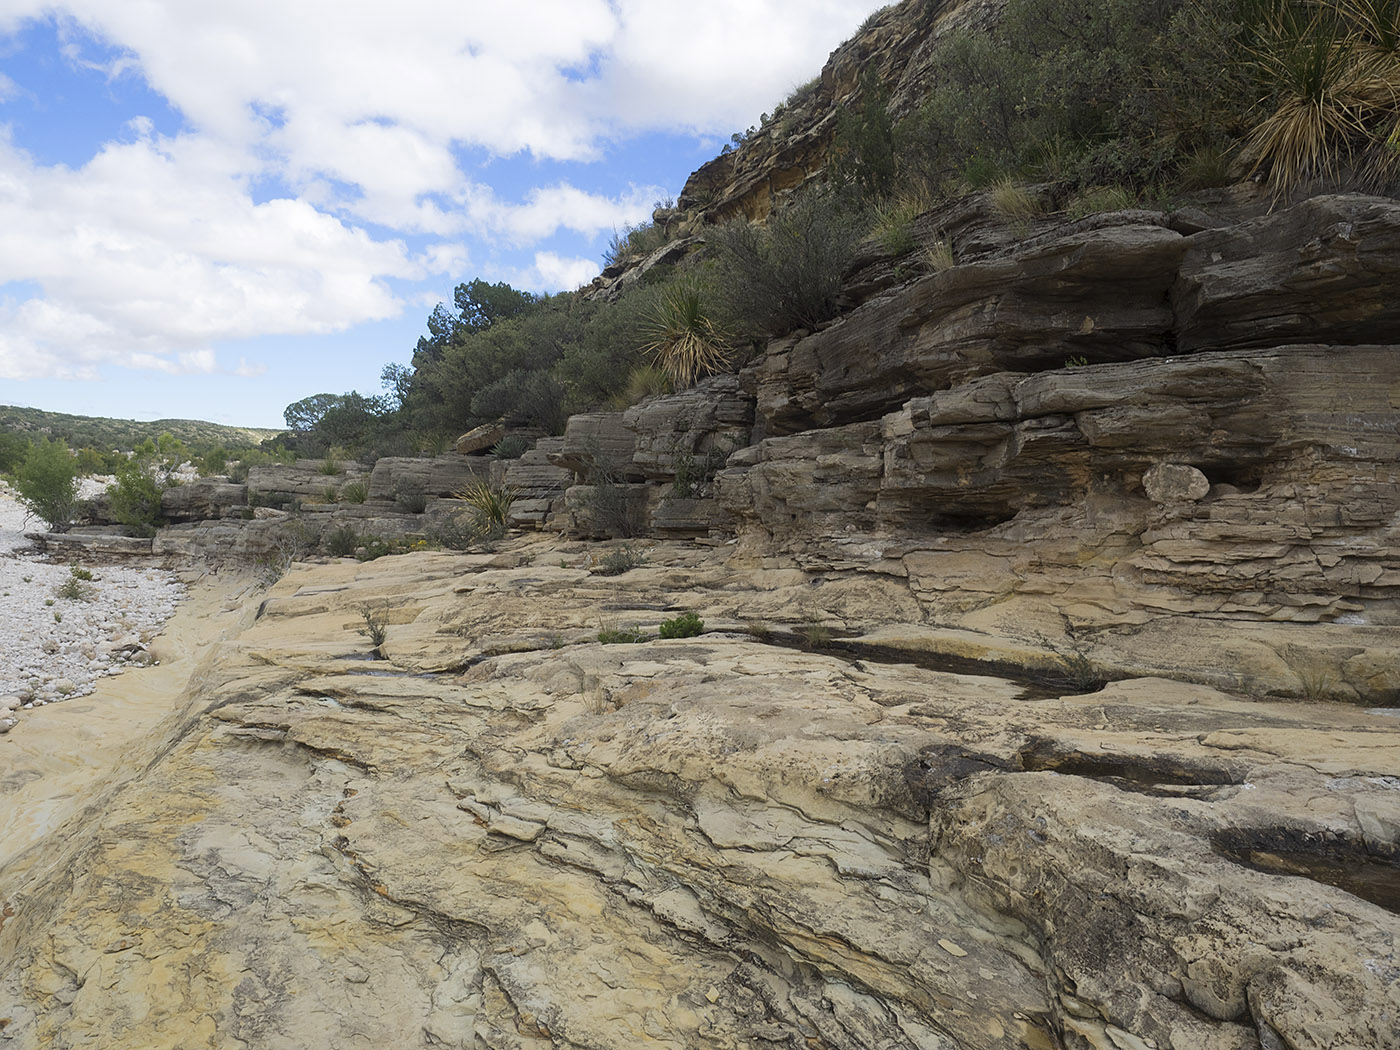 Fossil-rich limestone strata along the trail in McKittrick Canyon.